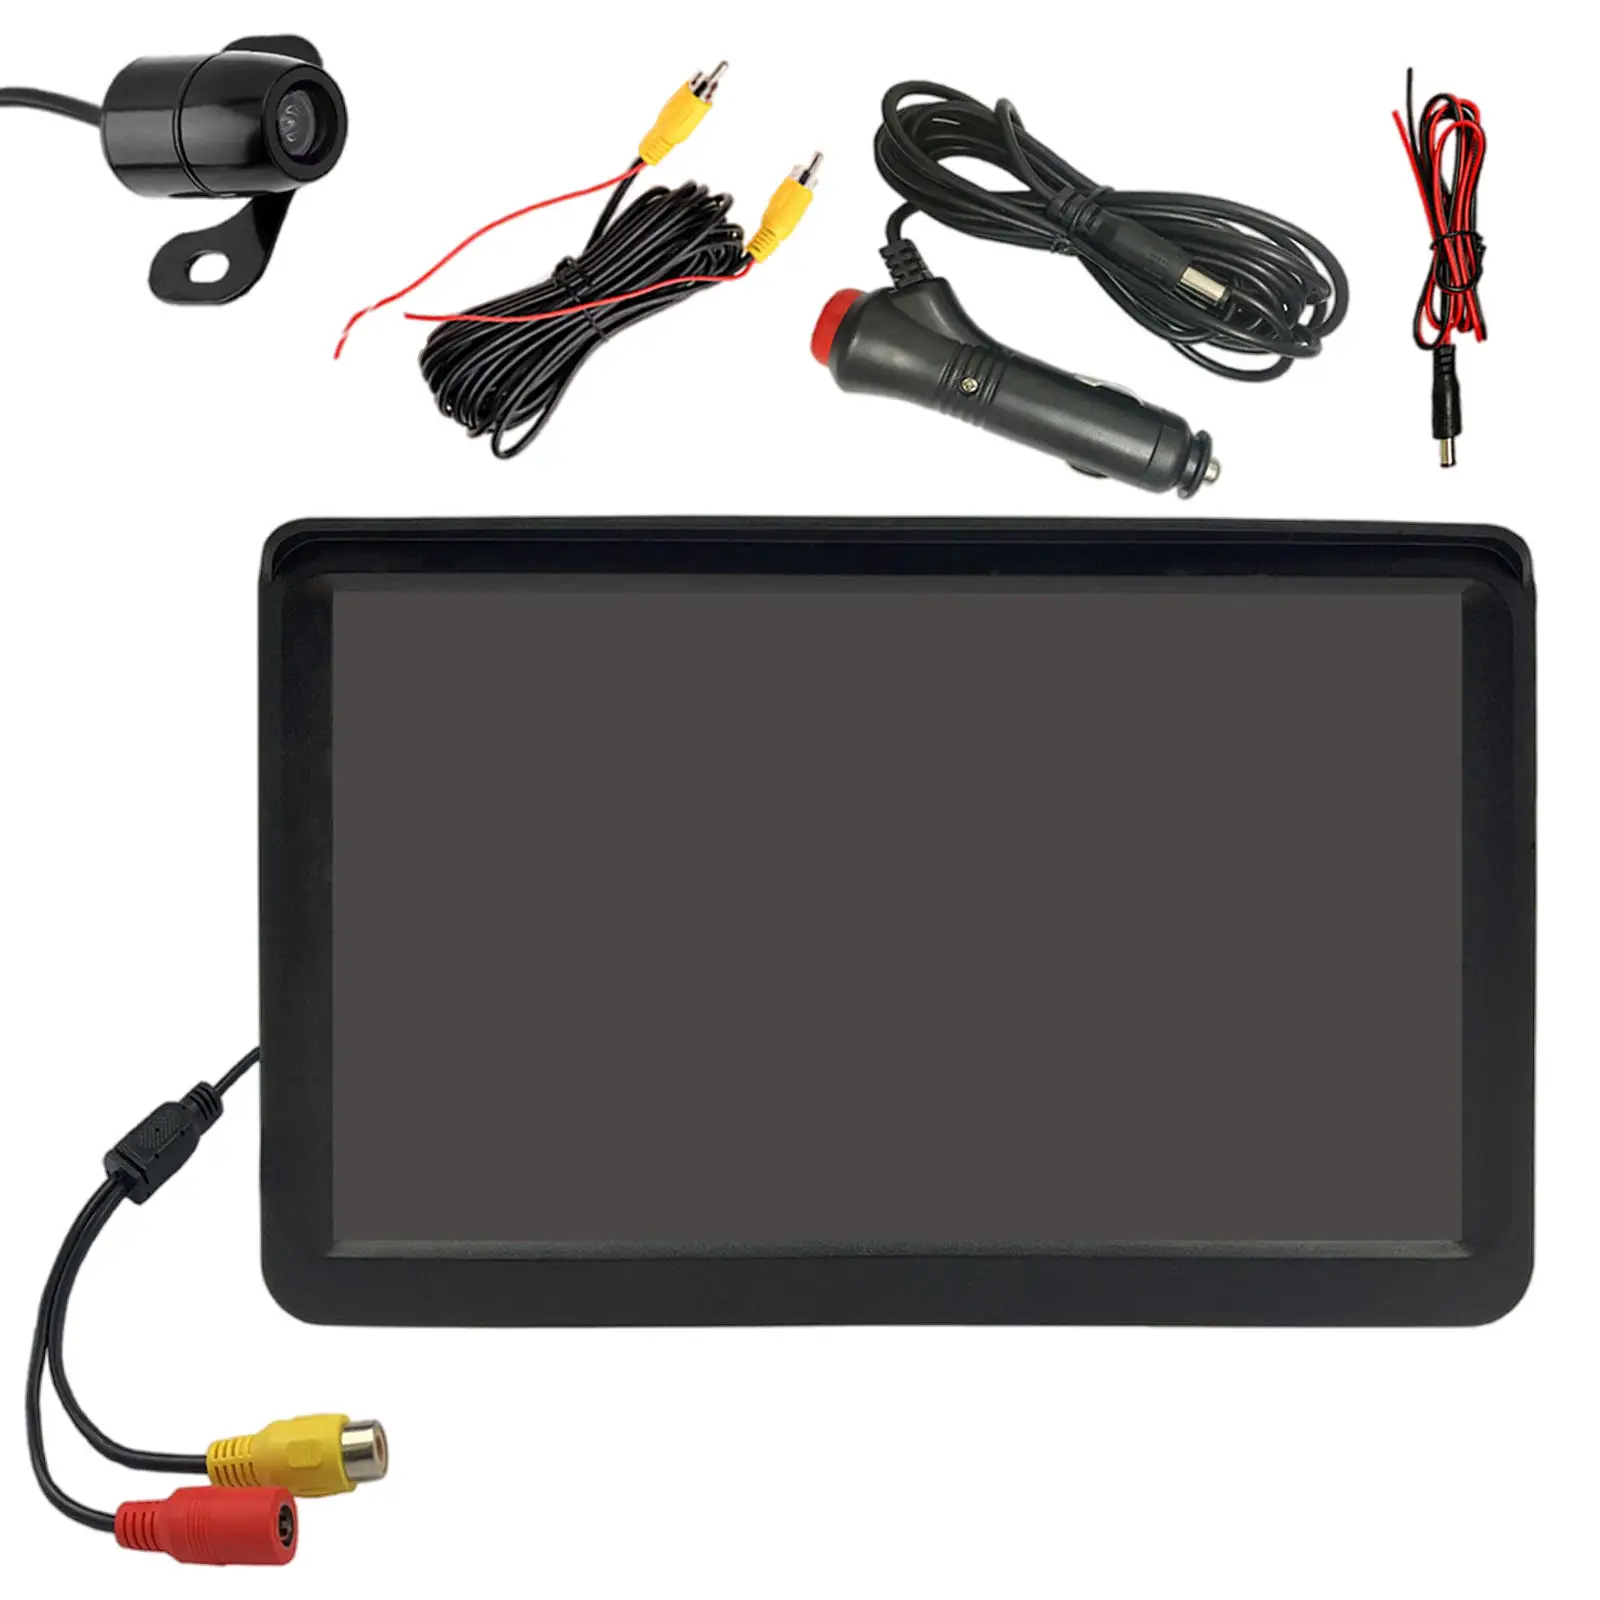 Rear View Car Monitor LCD 7 inch Color 170° Angle 12V HD Lens Reverse Camera Kit for Parking SUV Car Ntsc PaL TV System